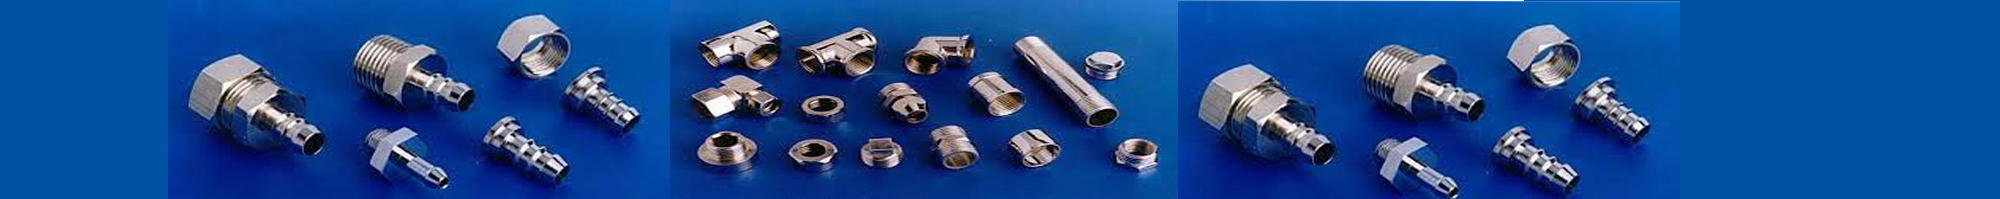 Nickel 200 / 201 Forged Fittings supplier